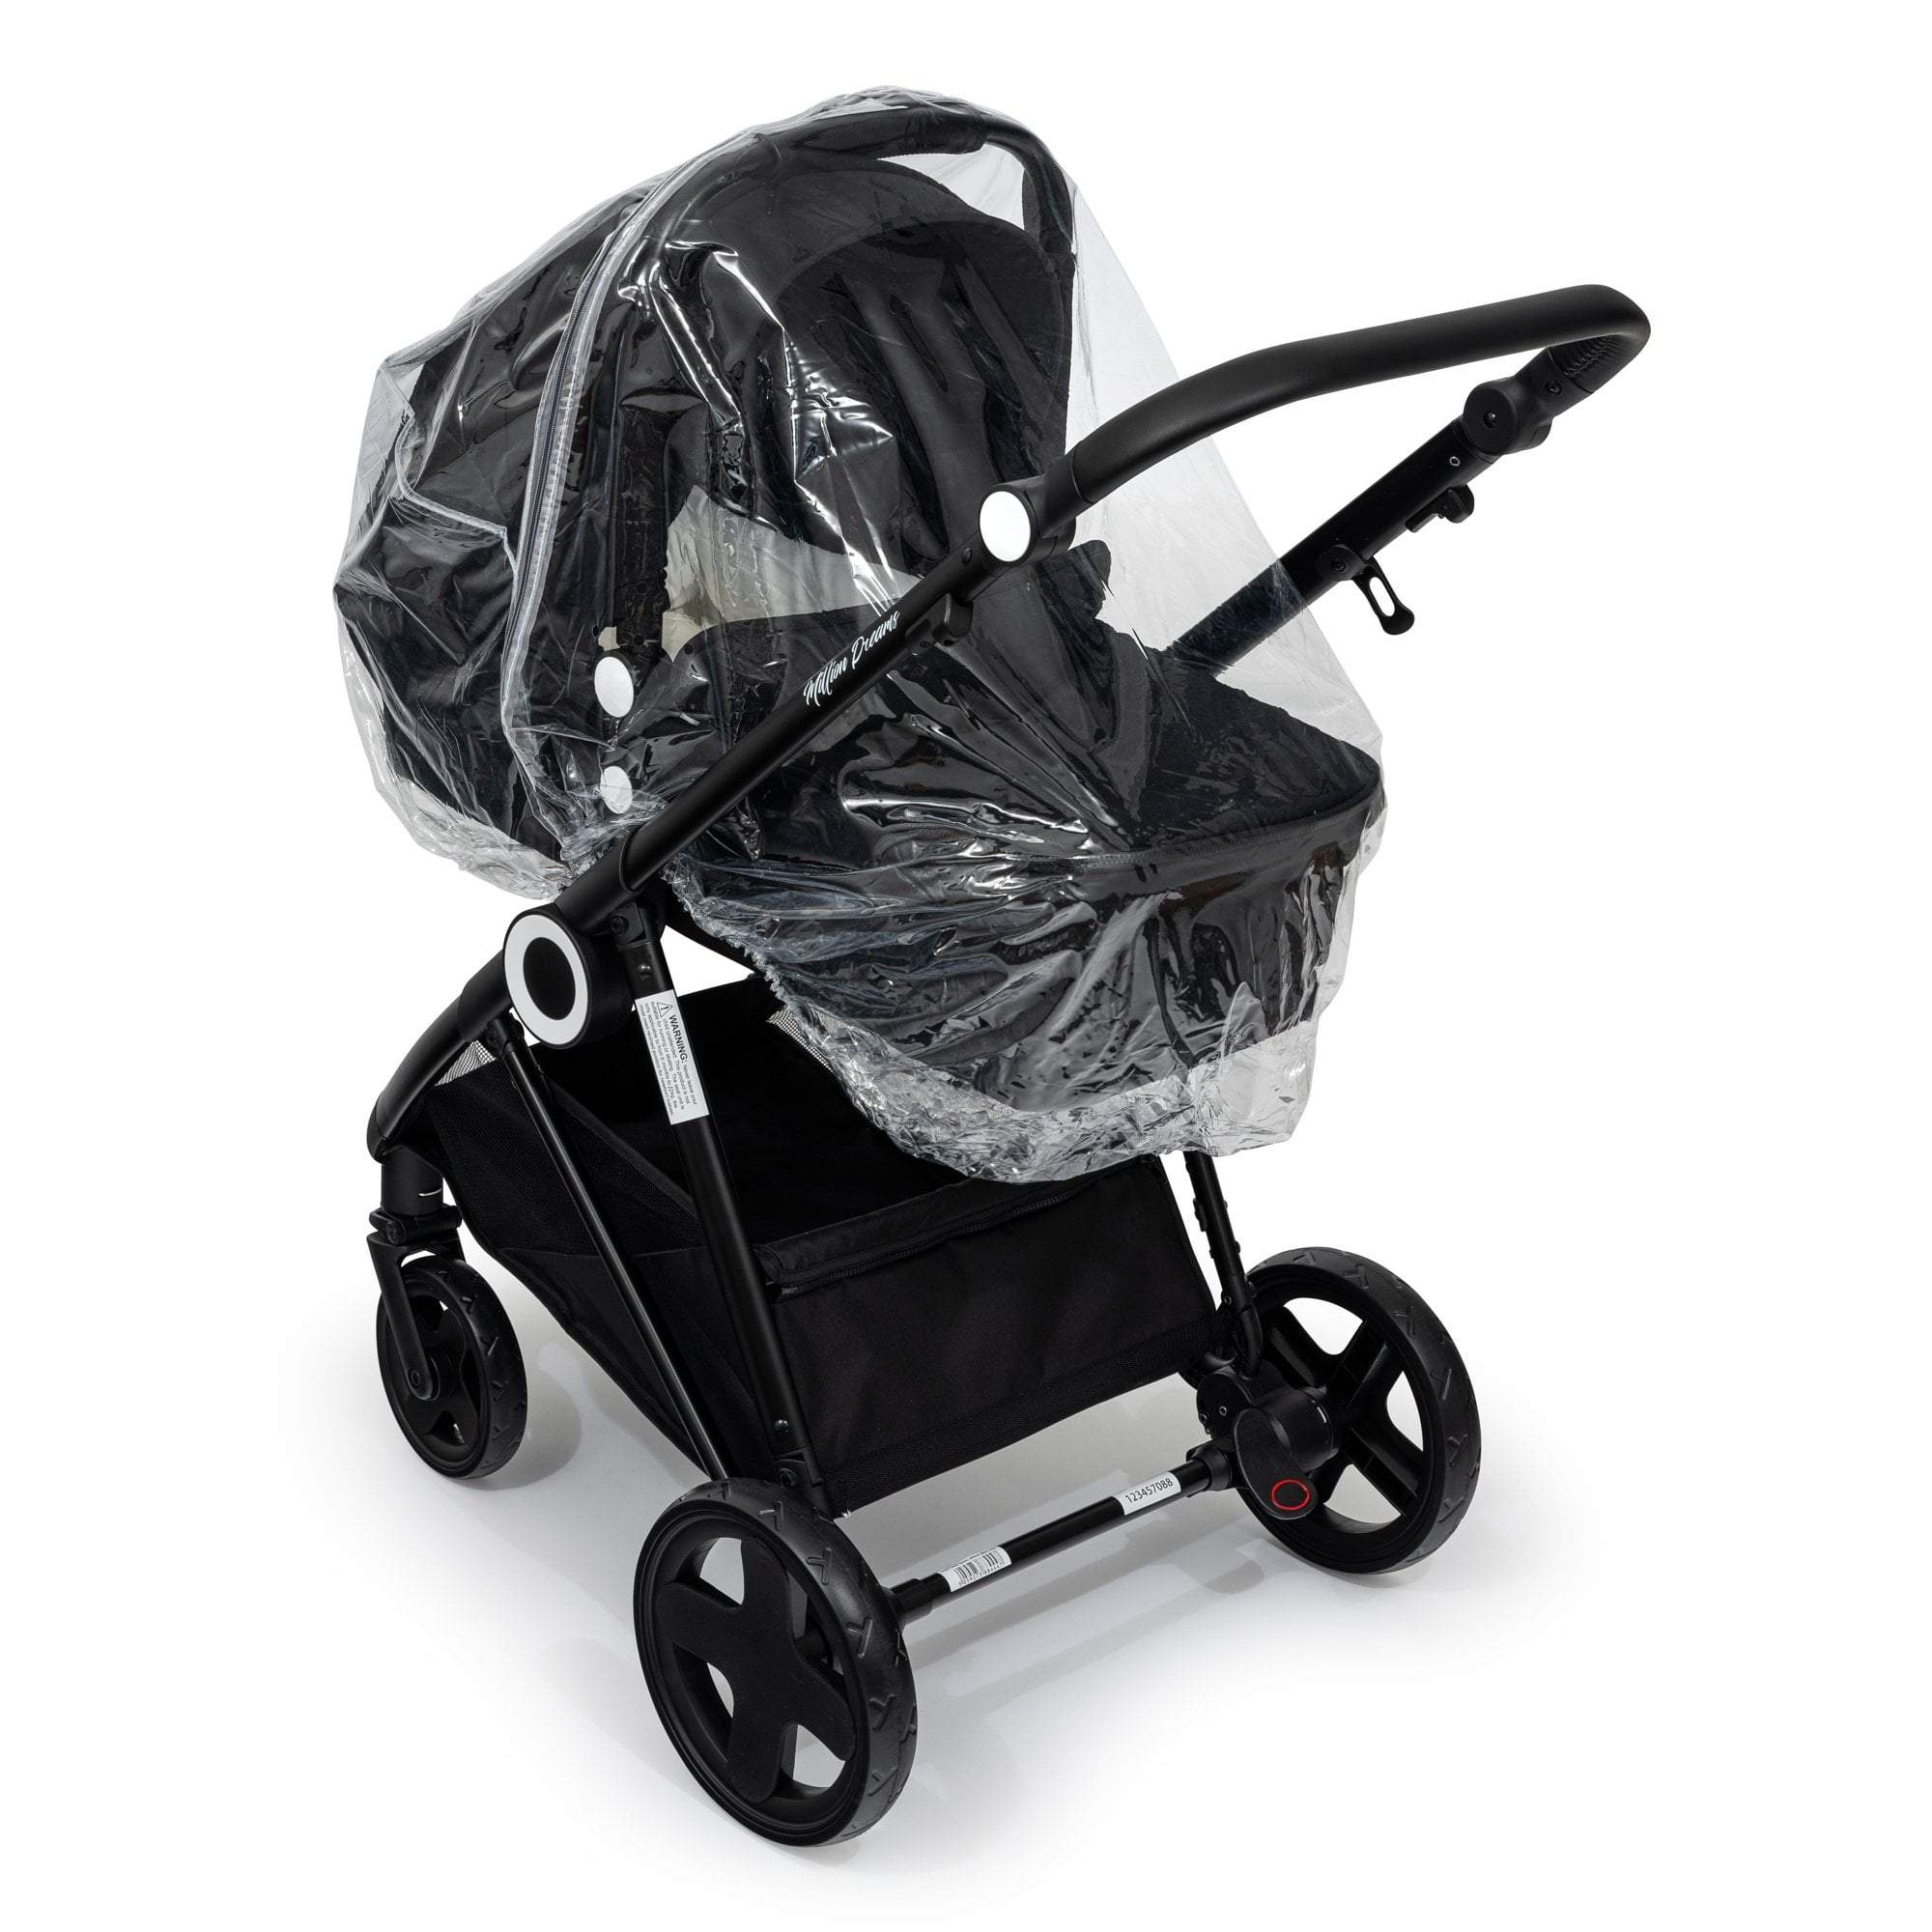 Carrycot Raincover Compatible With TFK - Fits All Models - For Your Little One